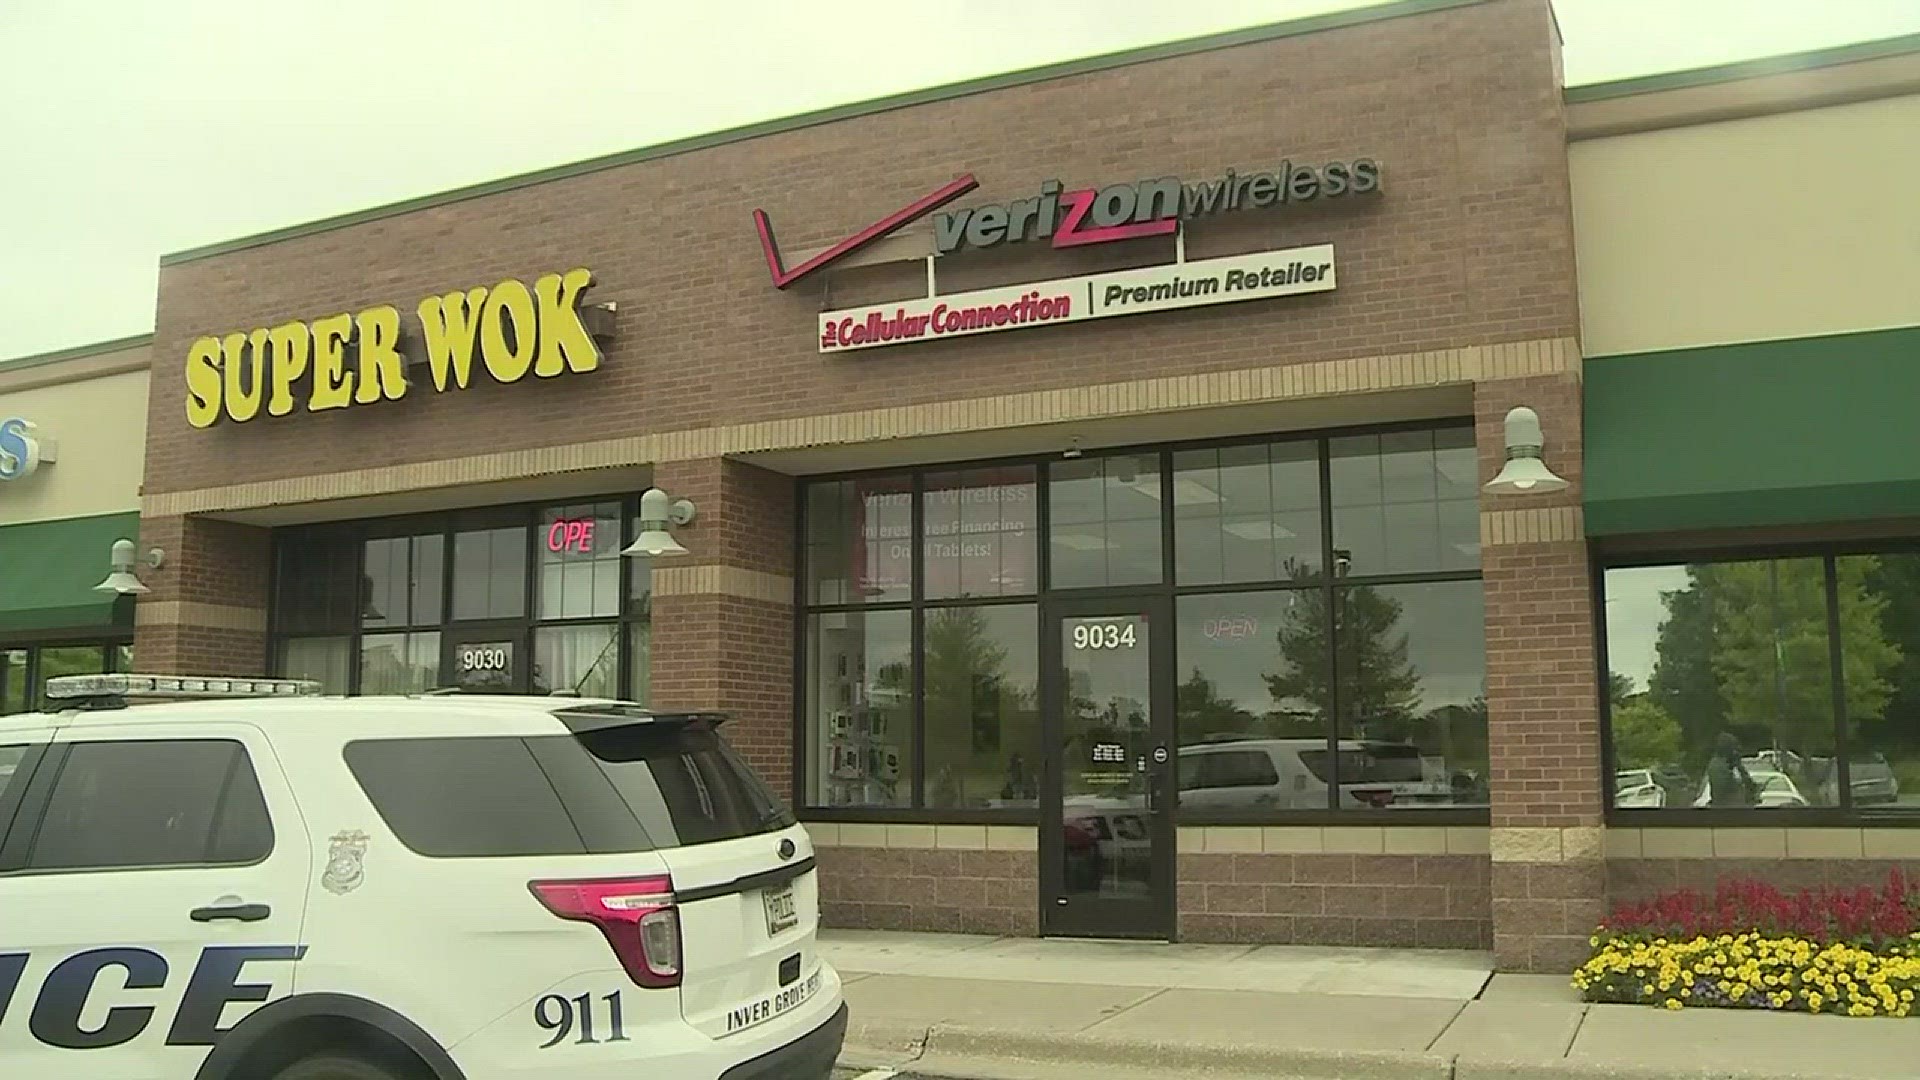 Police say it appears an armed robbery suspect was shot multiple times by a clerk at a Verizon Wireless store in Inver Grove Heights.